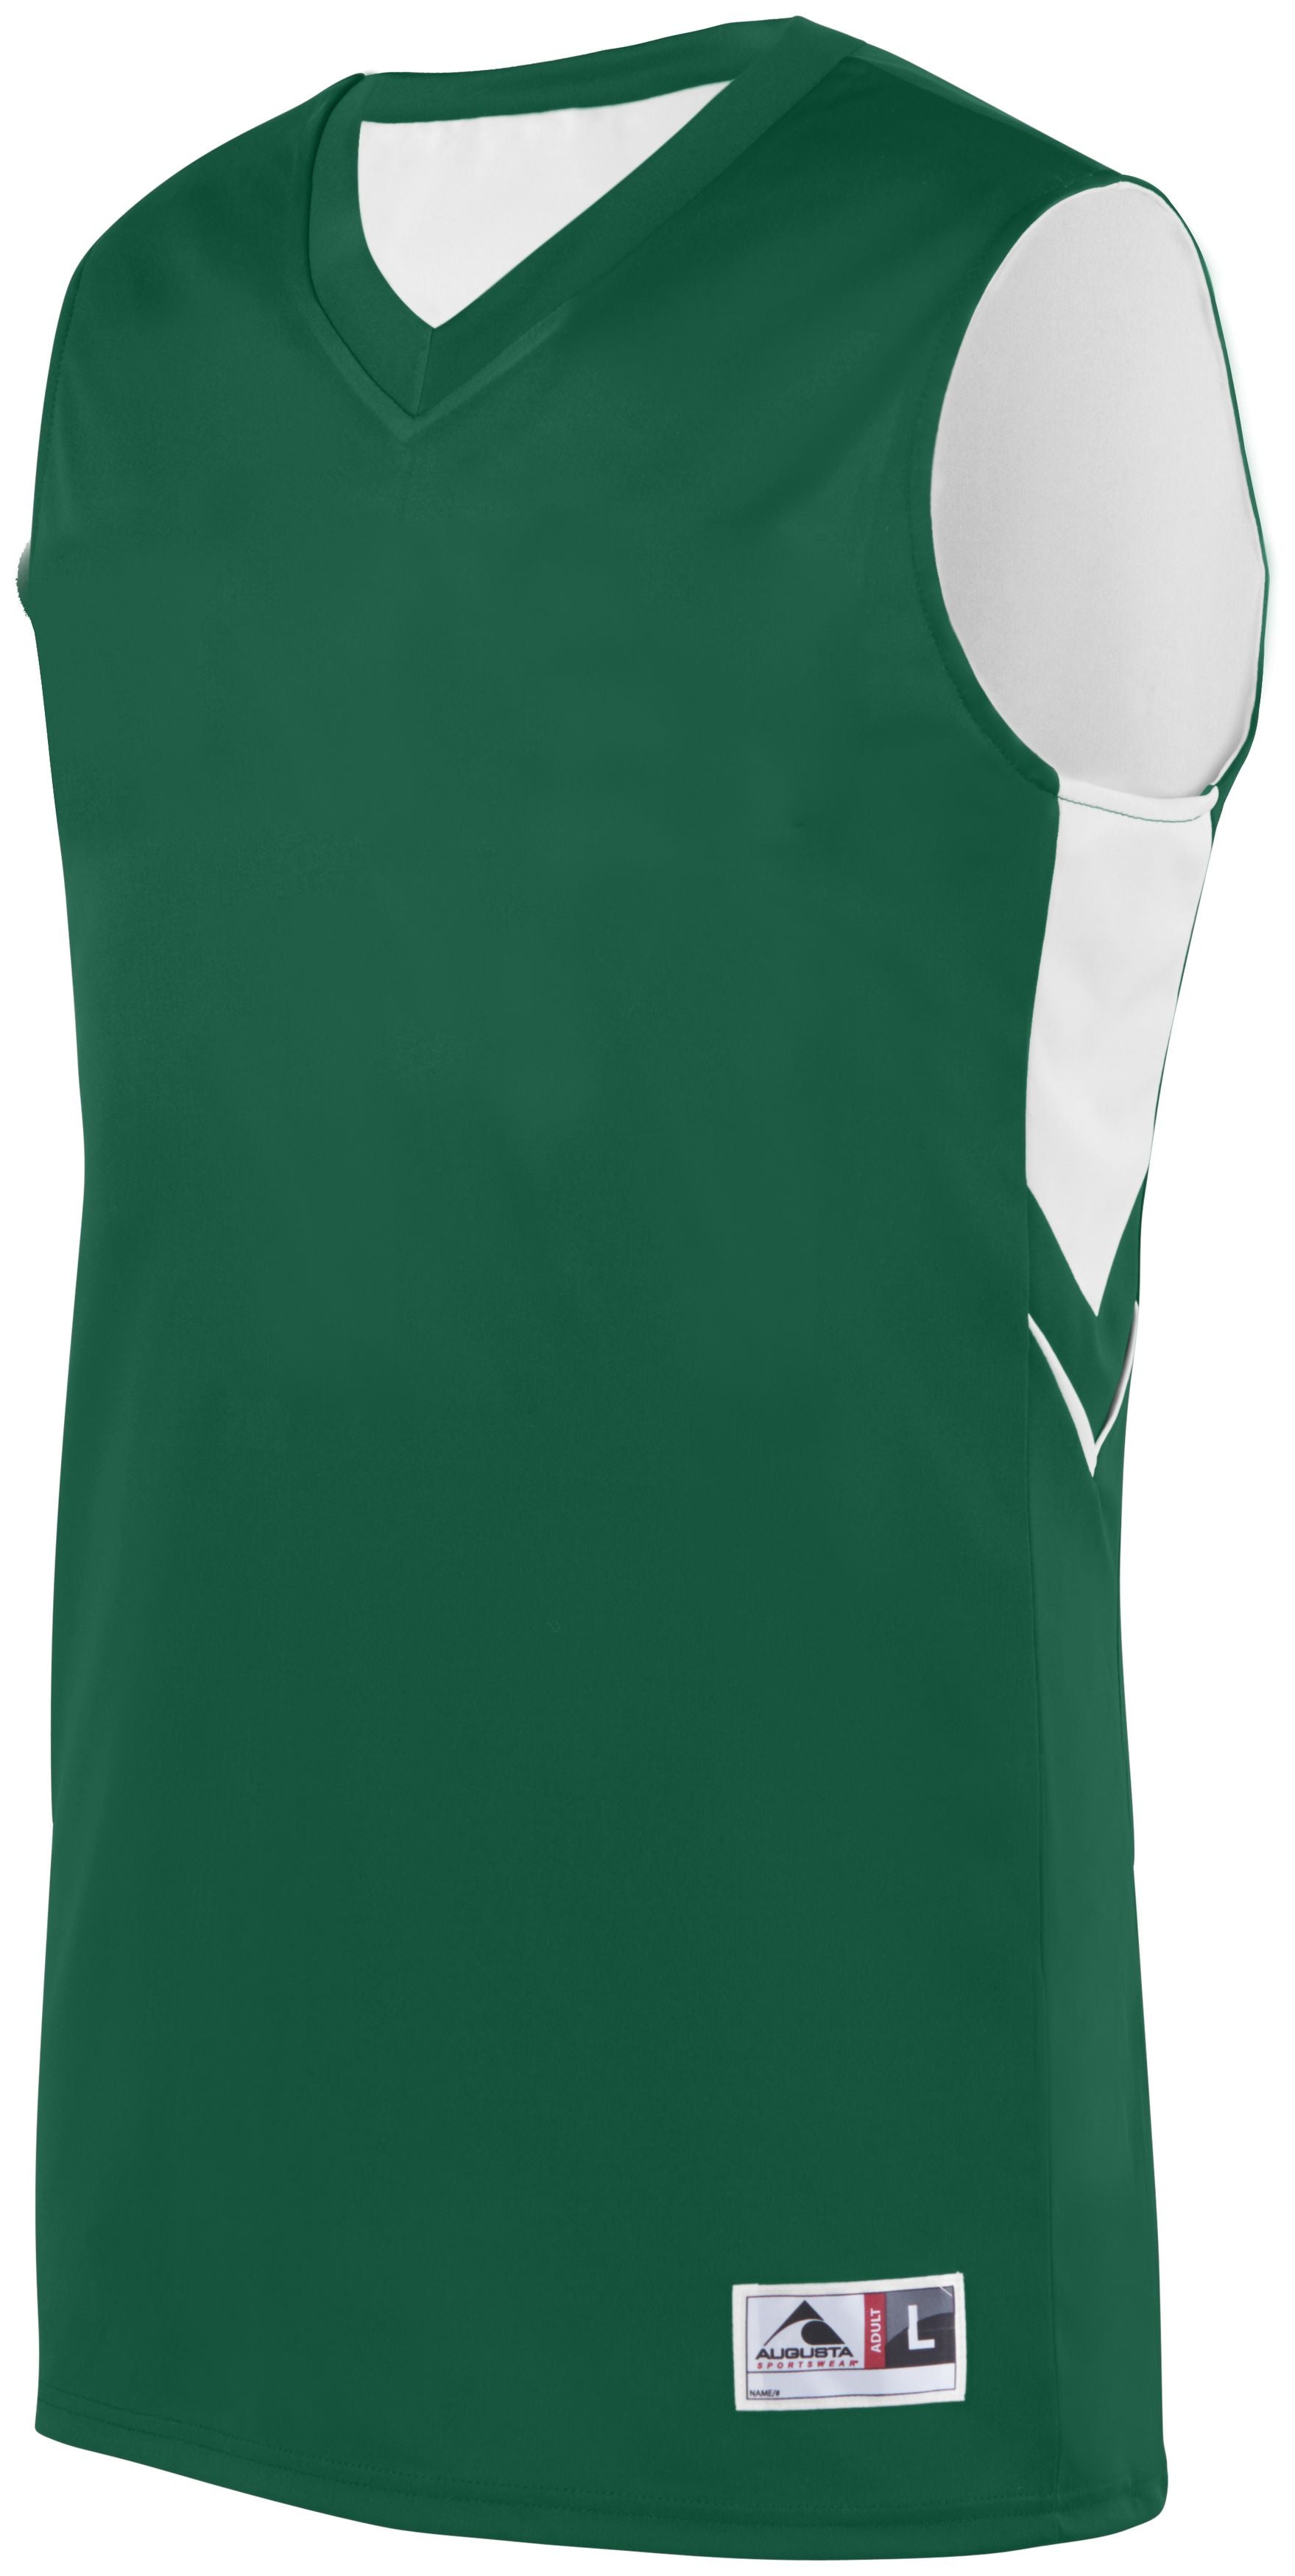 Augusta Sportswear Alley-Oop Reversible Jersey in Dark Green/White  -Part of the Adult, Adult-Jersey, Augusta-Products, Basketball, Shirts, All-Sports, All-Sports-1 product lines at KanaleyCreations.com